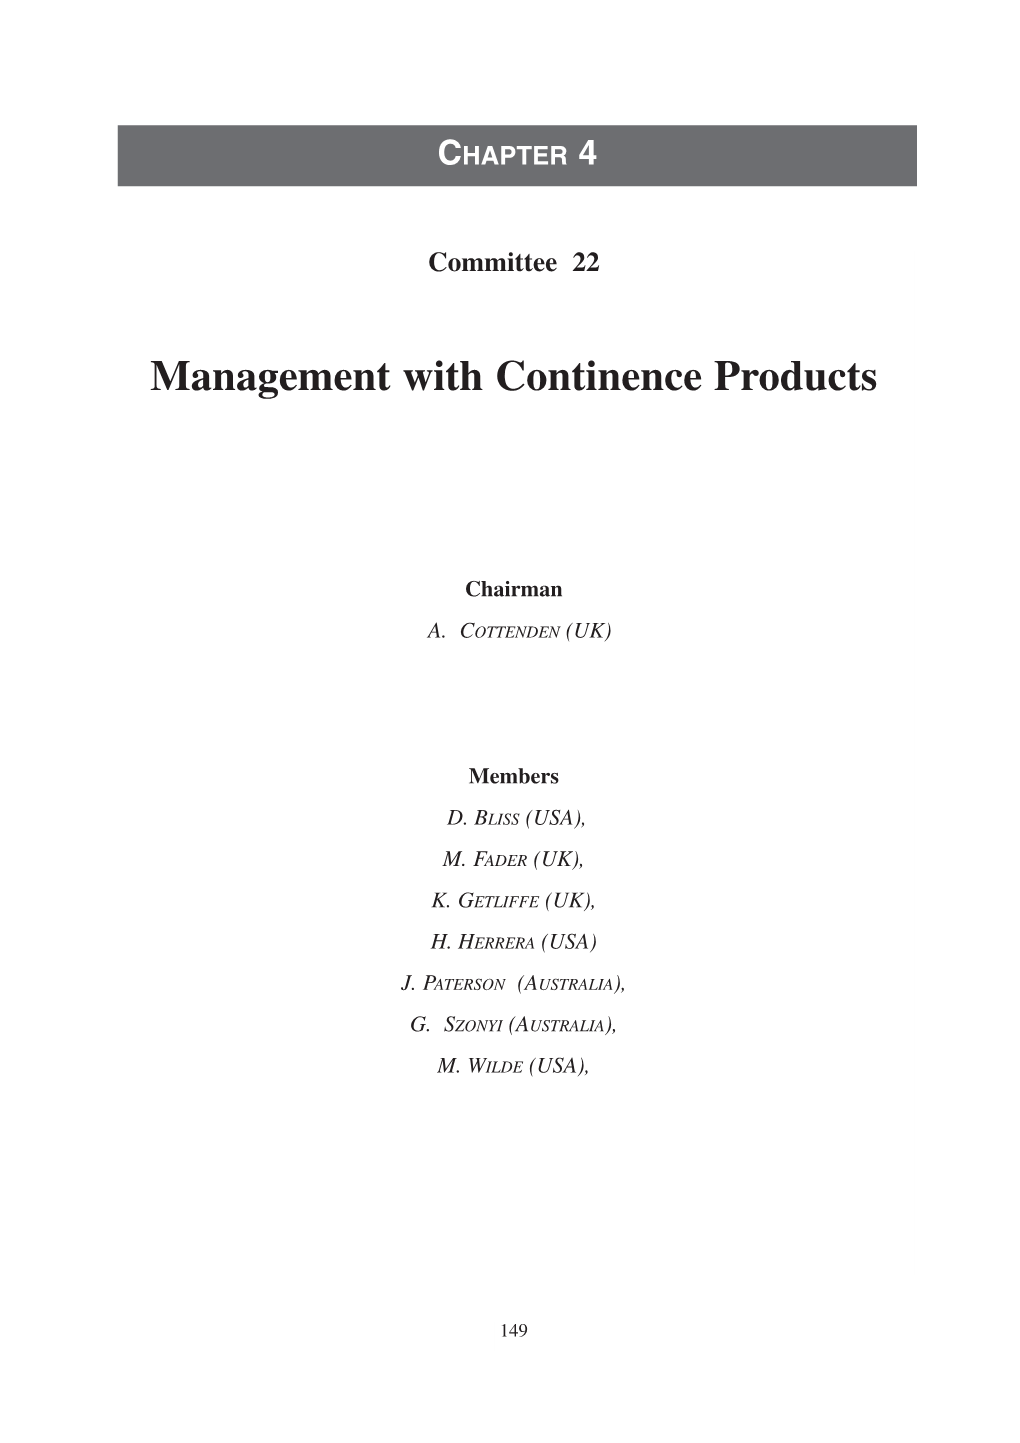 Management with Continence Products